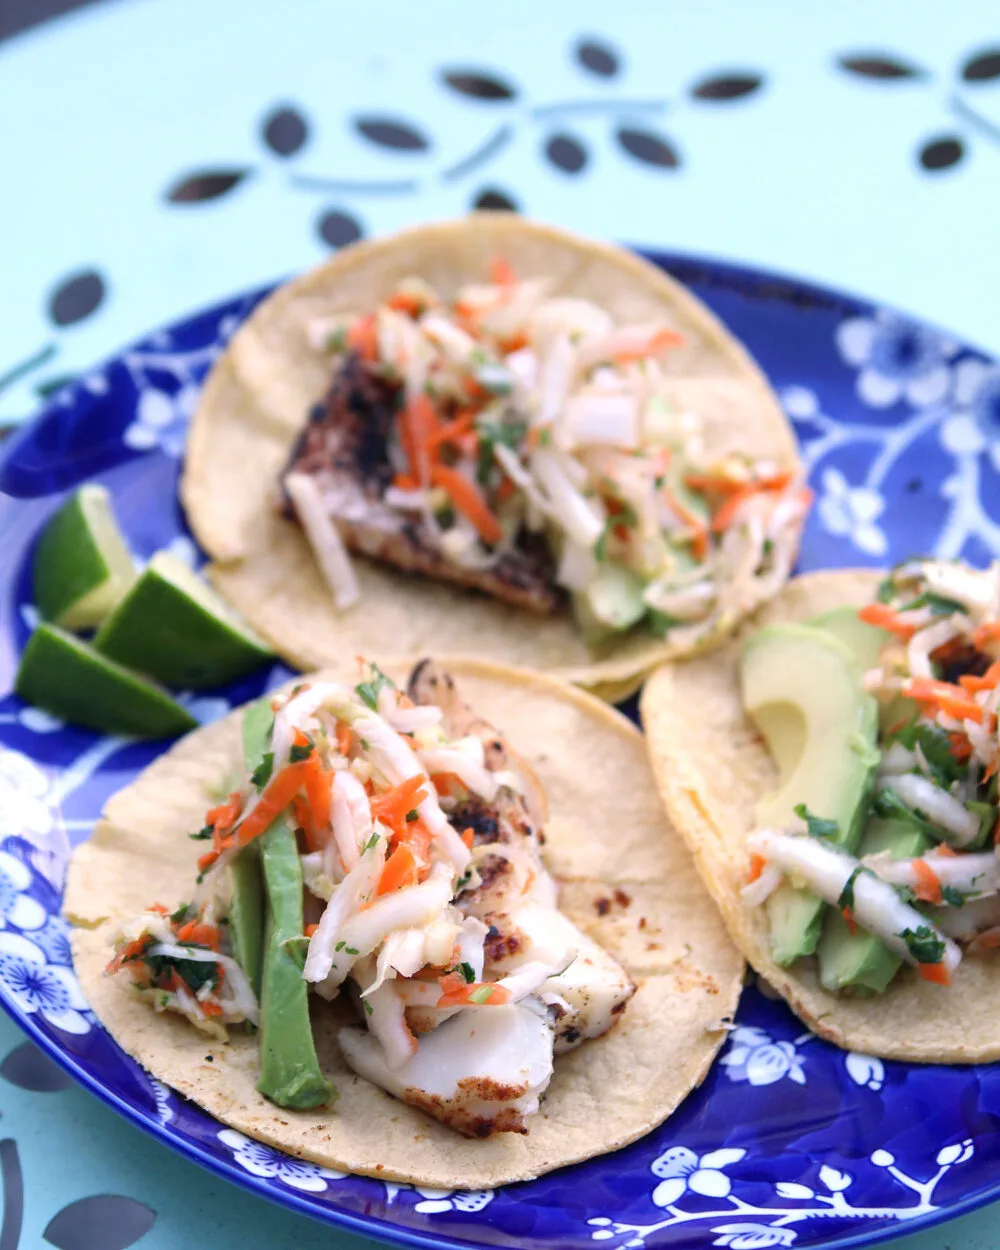 Three fish tacos are laid out on a blue and white plate. The seasoned fish is topped with Cilantro Lime Slaw and avocado.